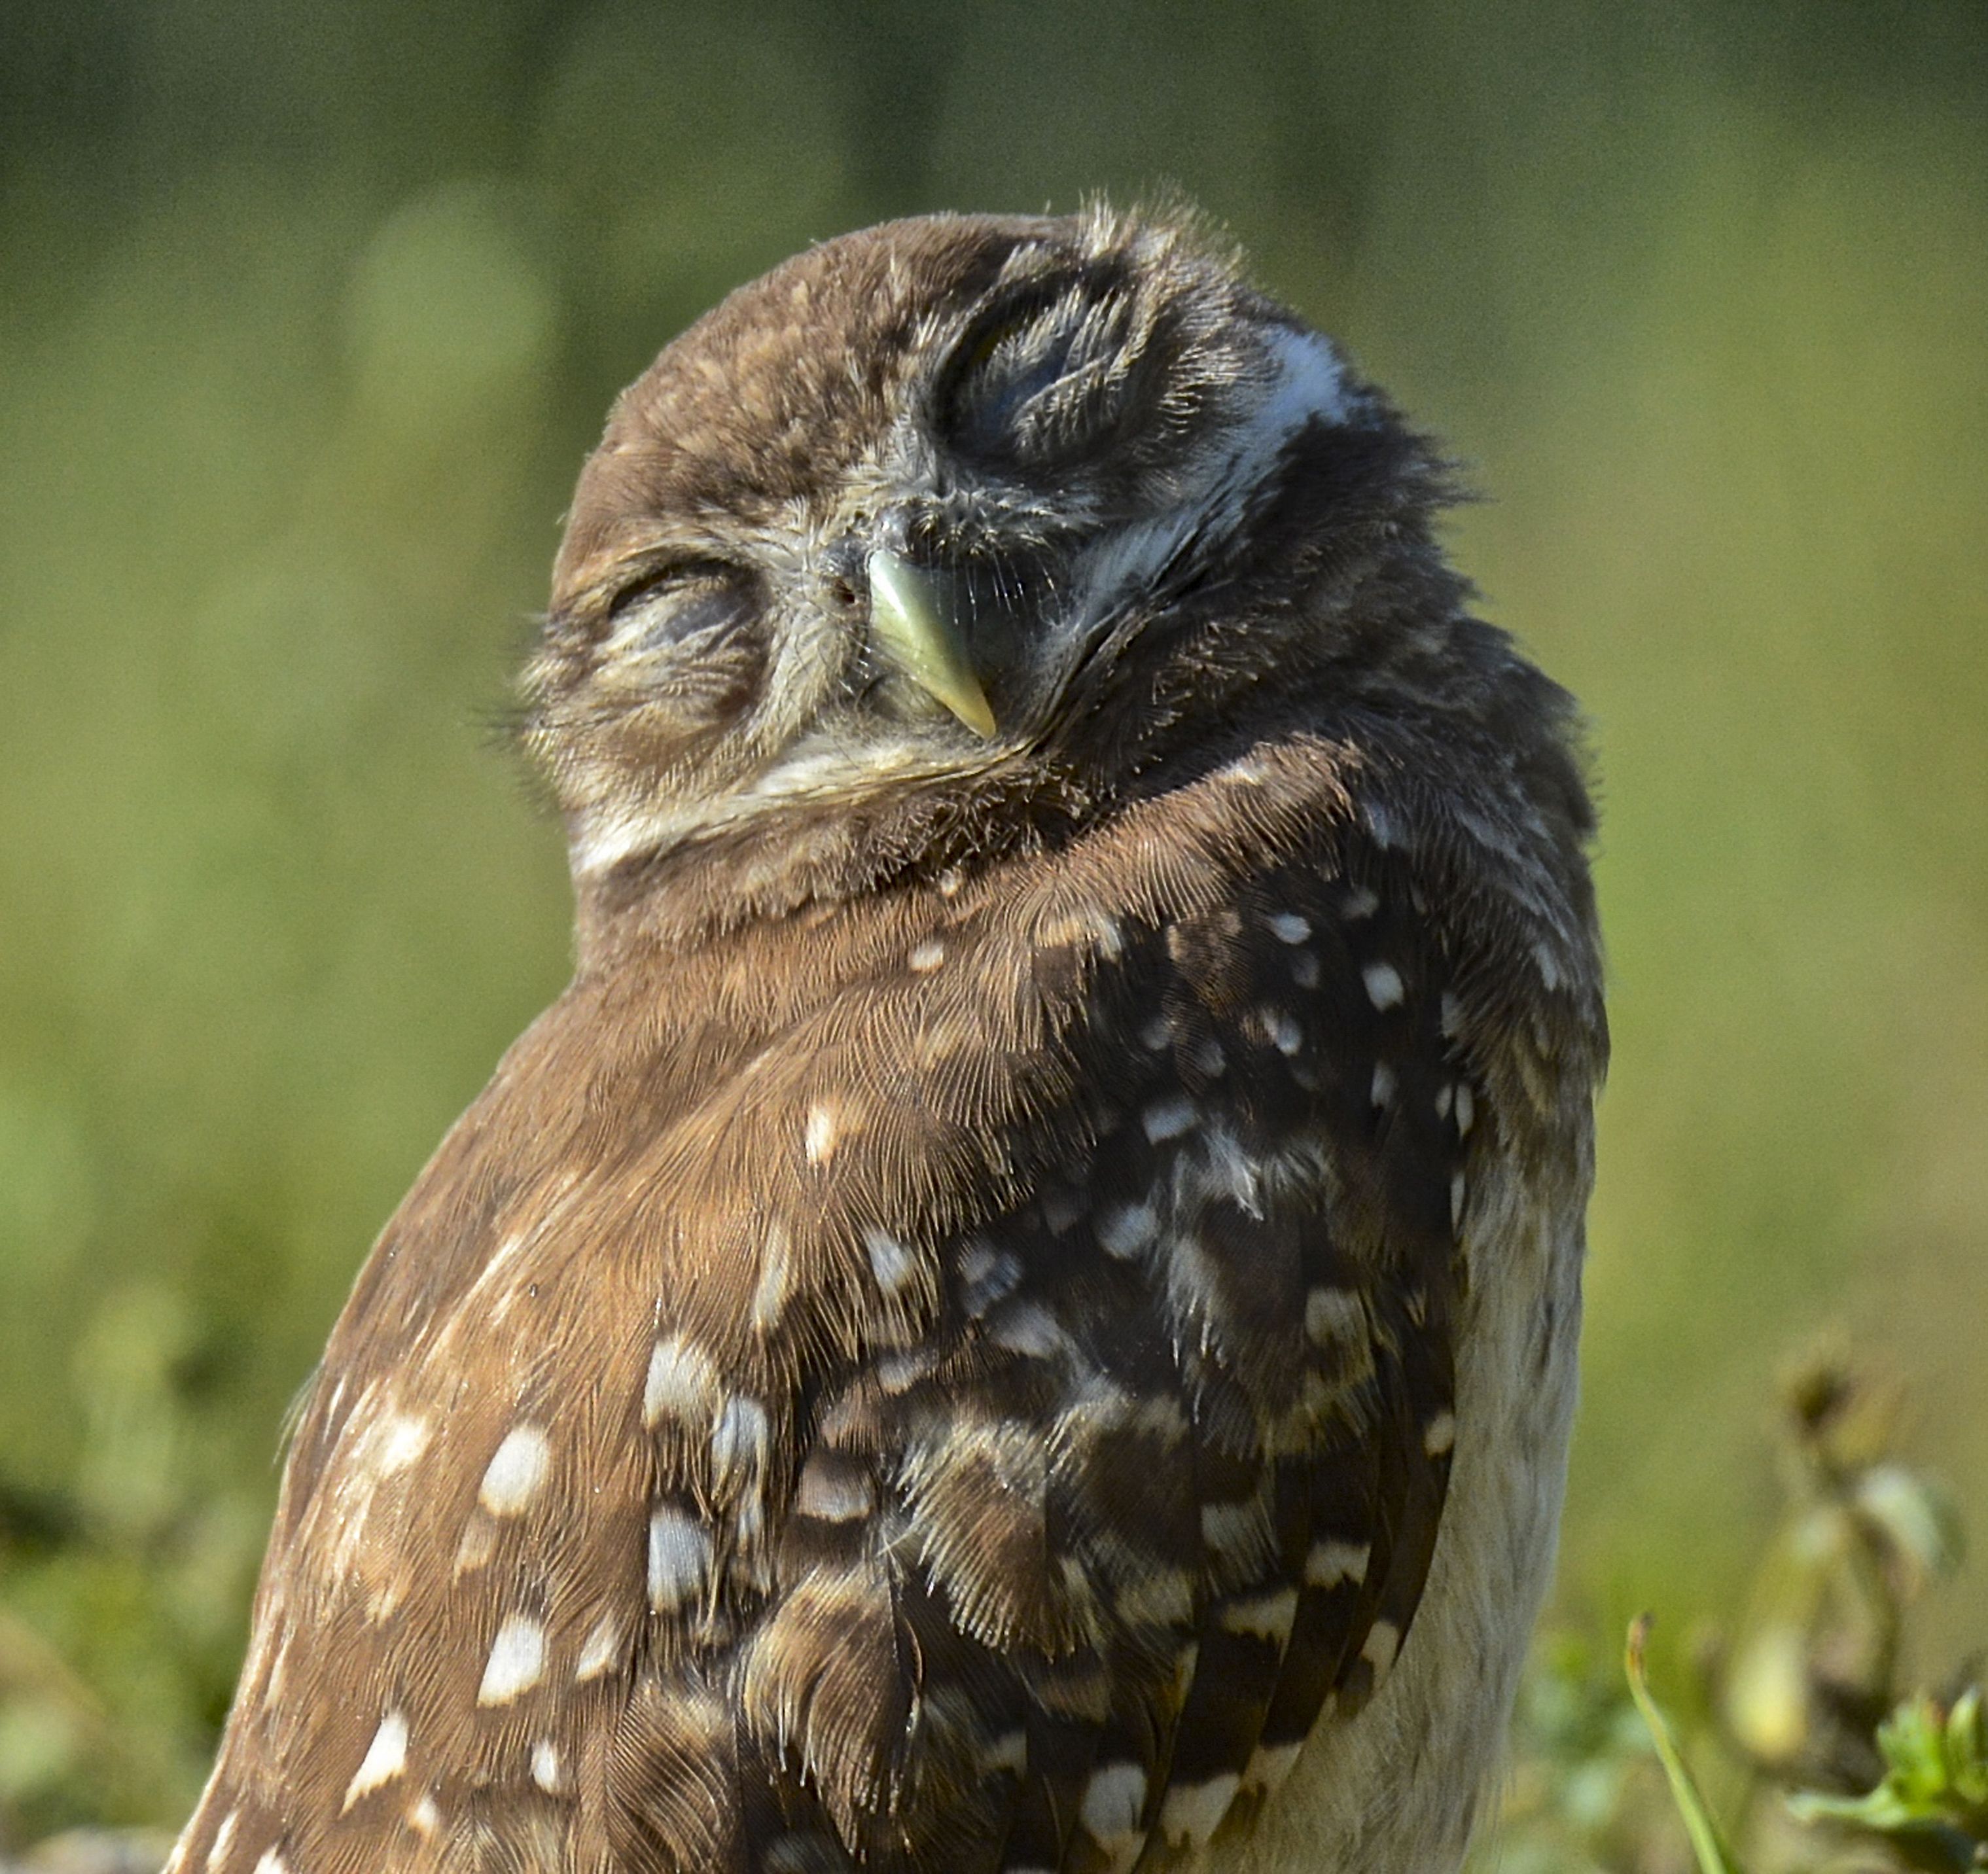 A burrowing owl closes its eyes and tilts its head as it stands in the sun.